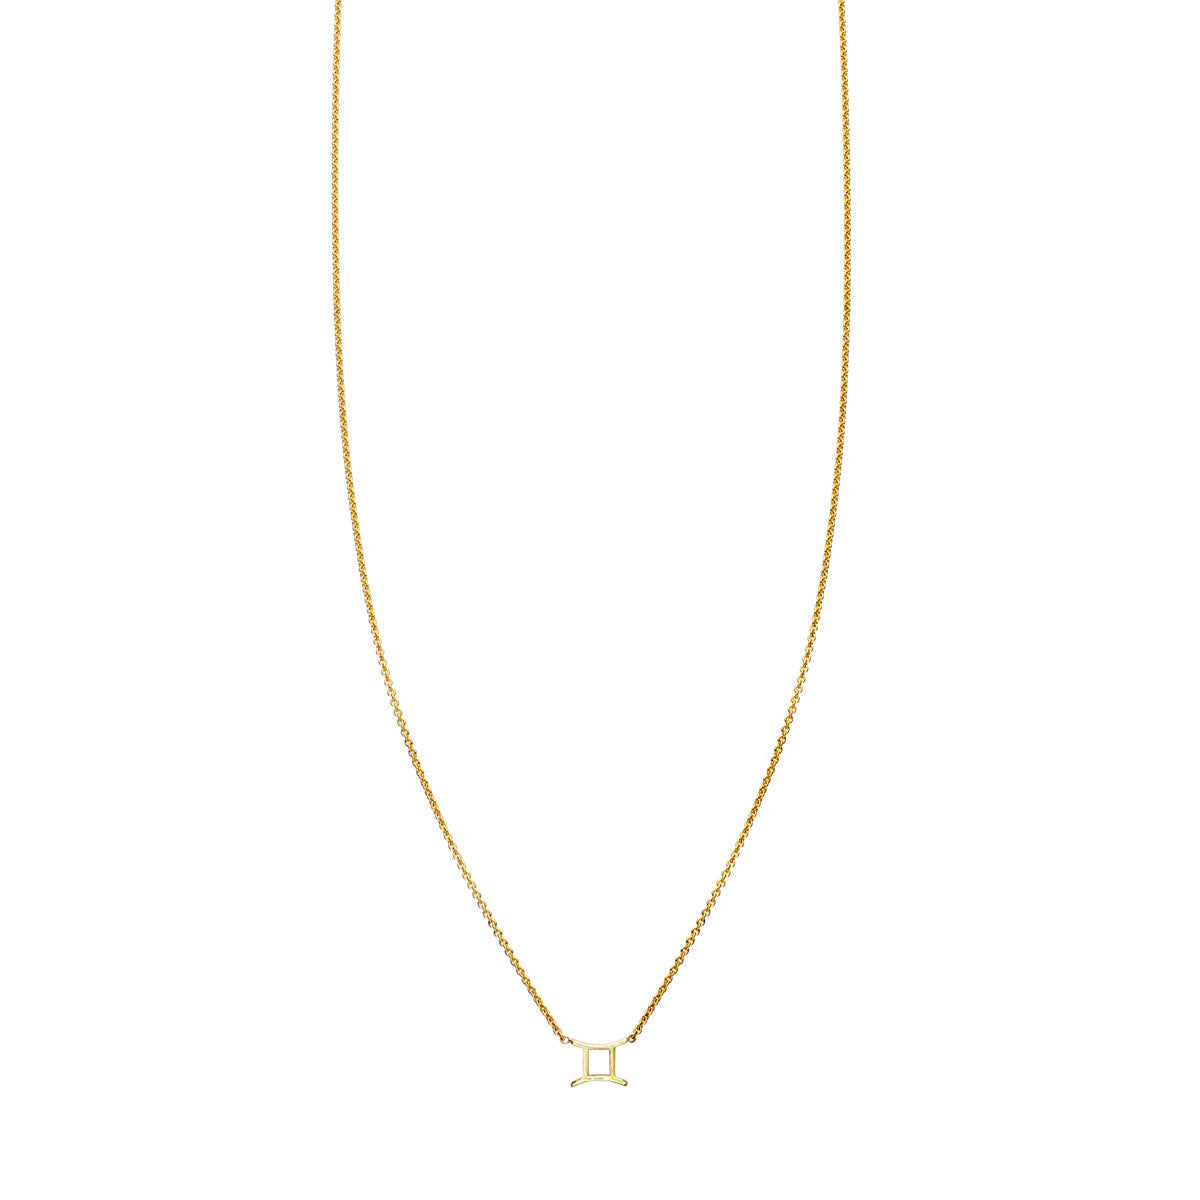 18k Gold Plated Zodiac Sign Necklace by REIGN and RELICS - Based in LA